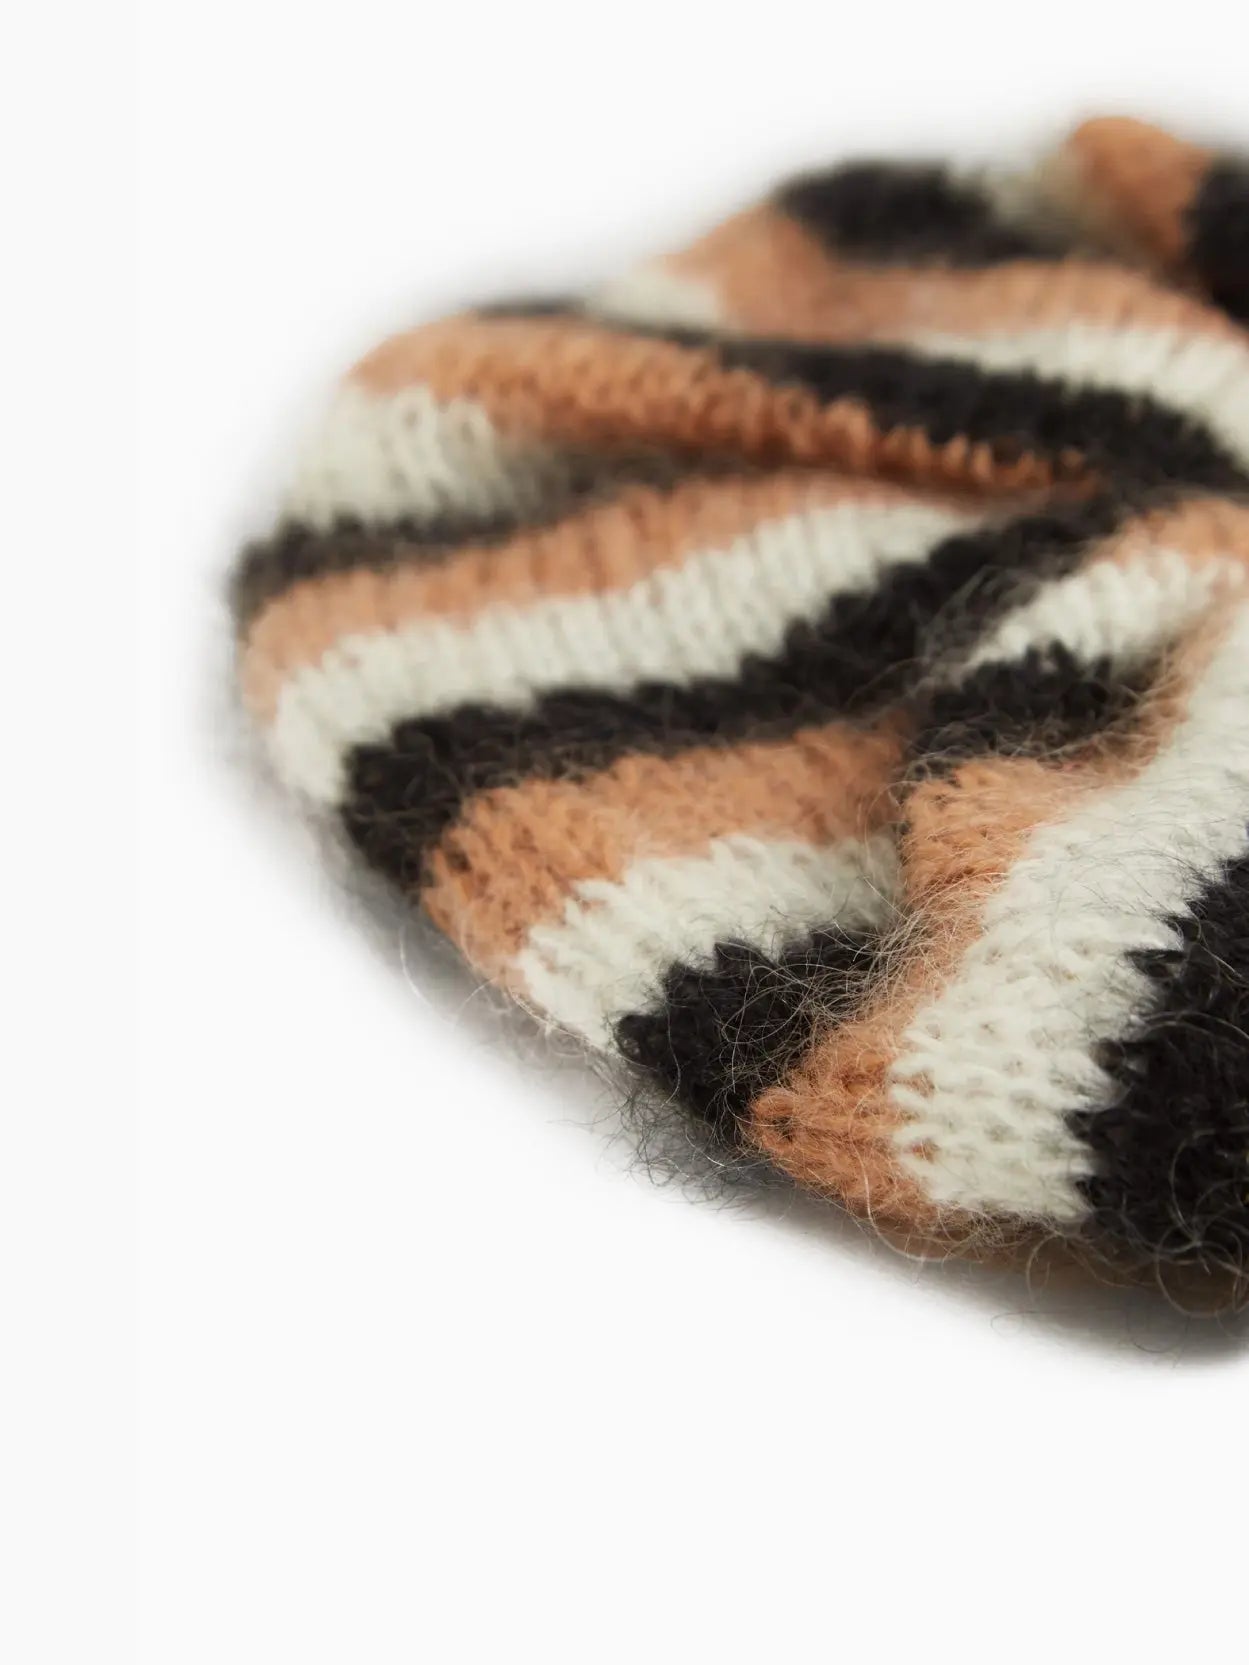 A fuzzy round Tomasa Eugenia Scrunchie with alternating stripes of cream, brown, and black is available at Bassalstore. The scrunchie has a soft texture and a tightly gathered center.